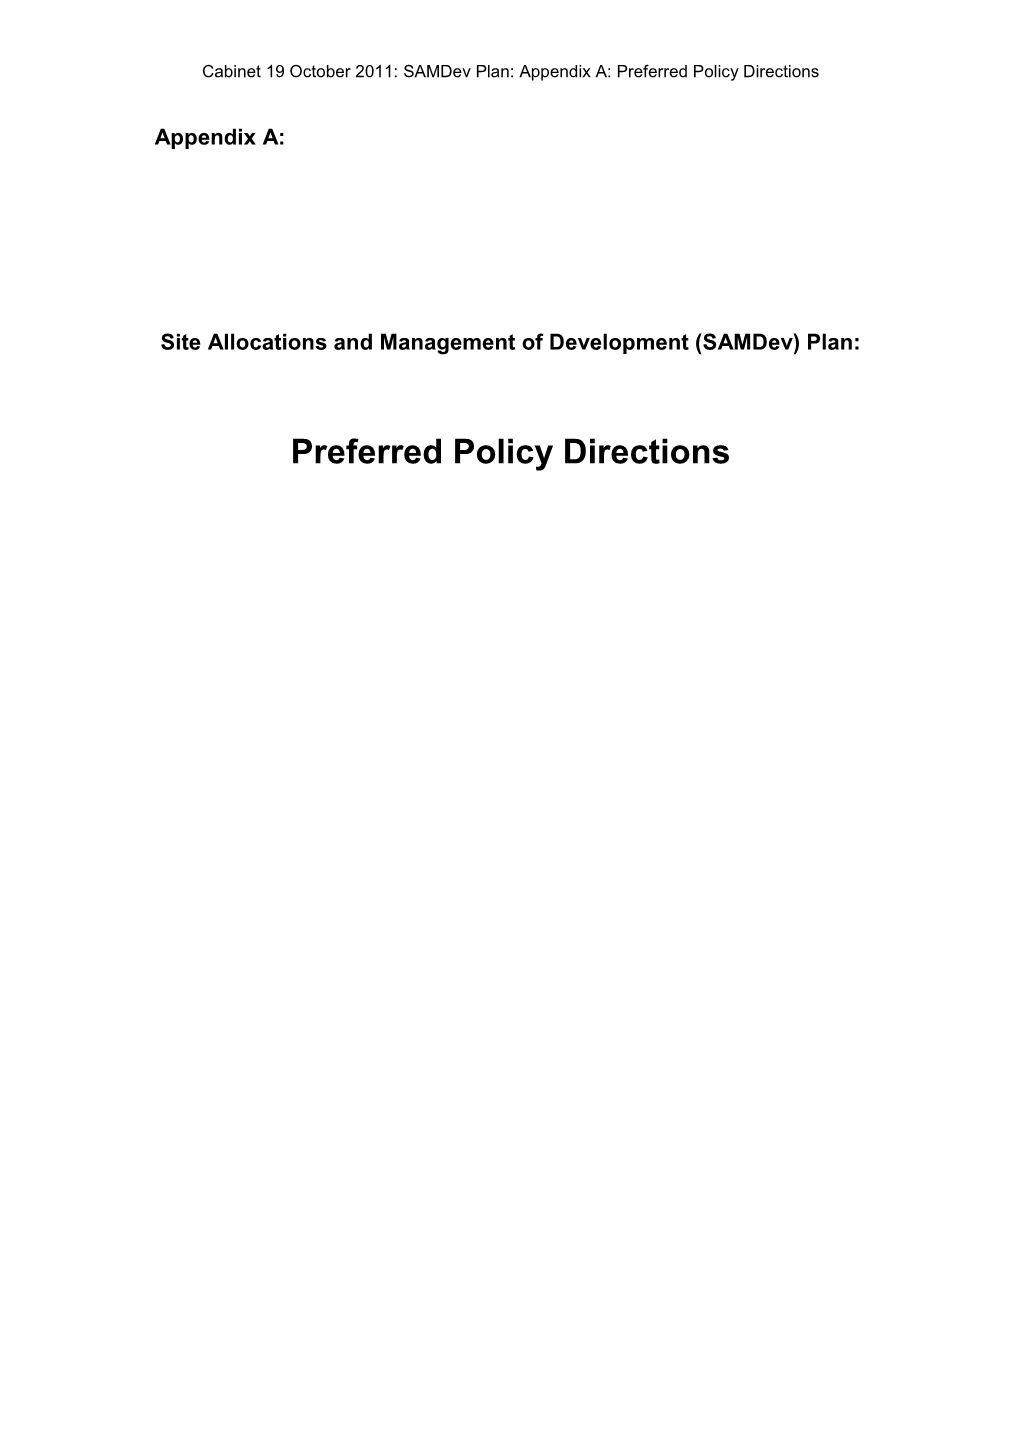 Preferred Policy Directions